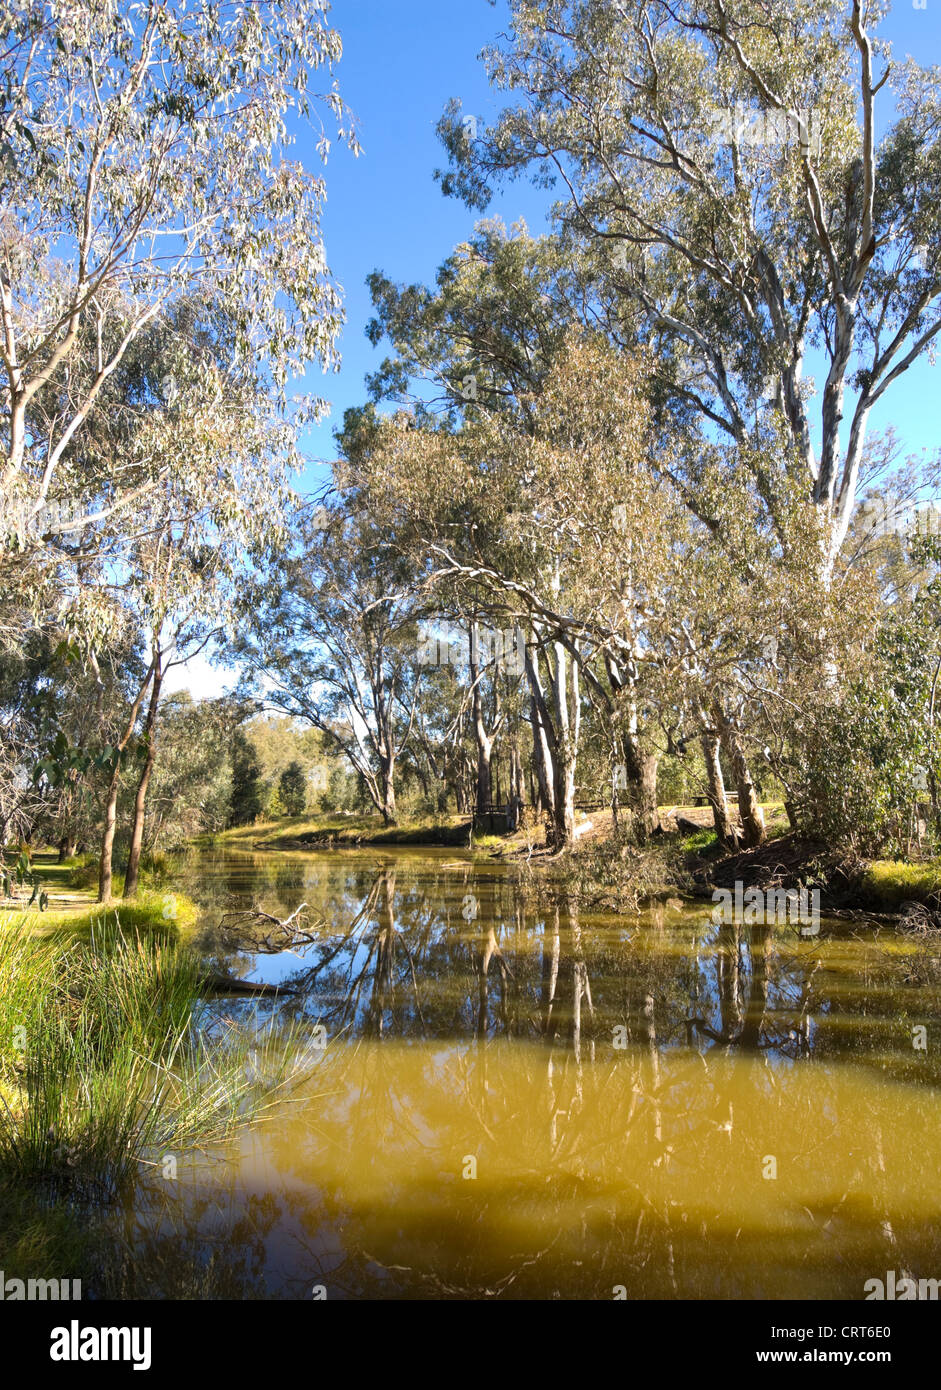 An Anabranch of the Murray River, Wonga Wetlands, Albury, New South Wales, Australia Stock Photo